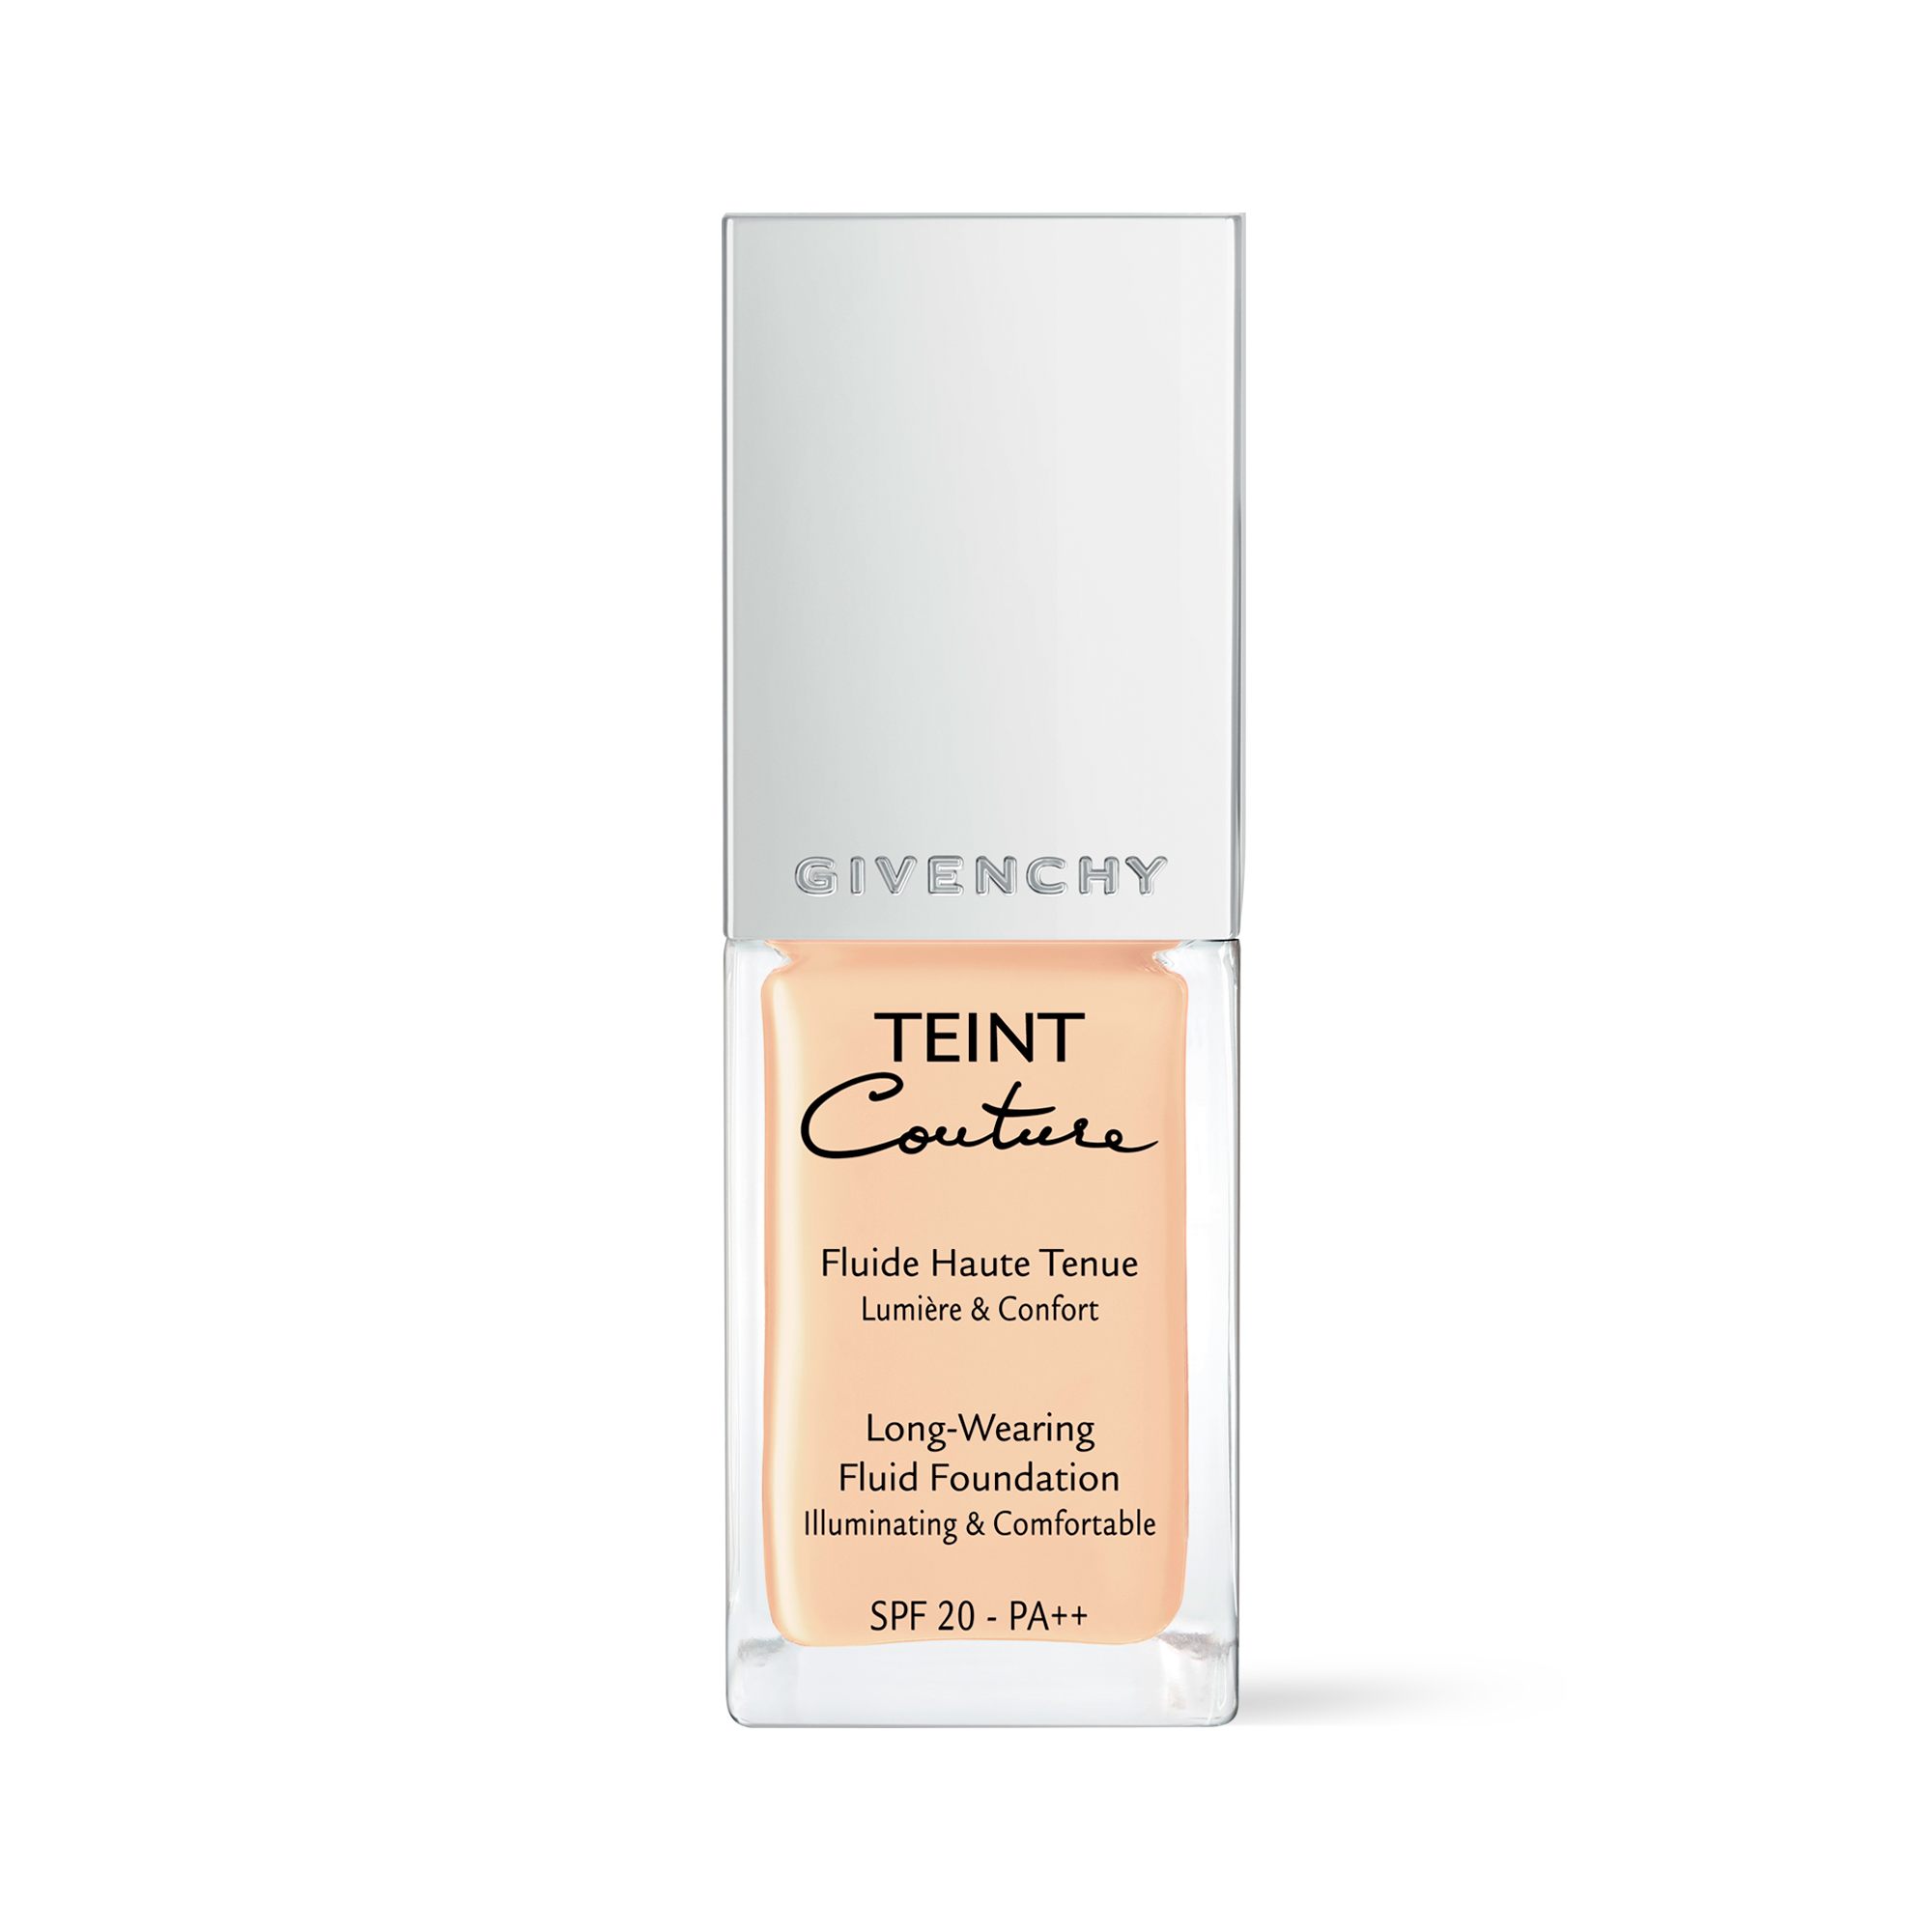 TEINT COUTURE FLUID • Long-Wearing Fluid Foundation SPF 20 - PA++ ∷ GIVENCHY